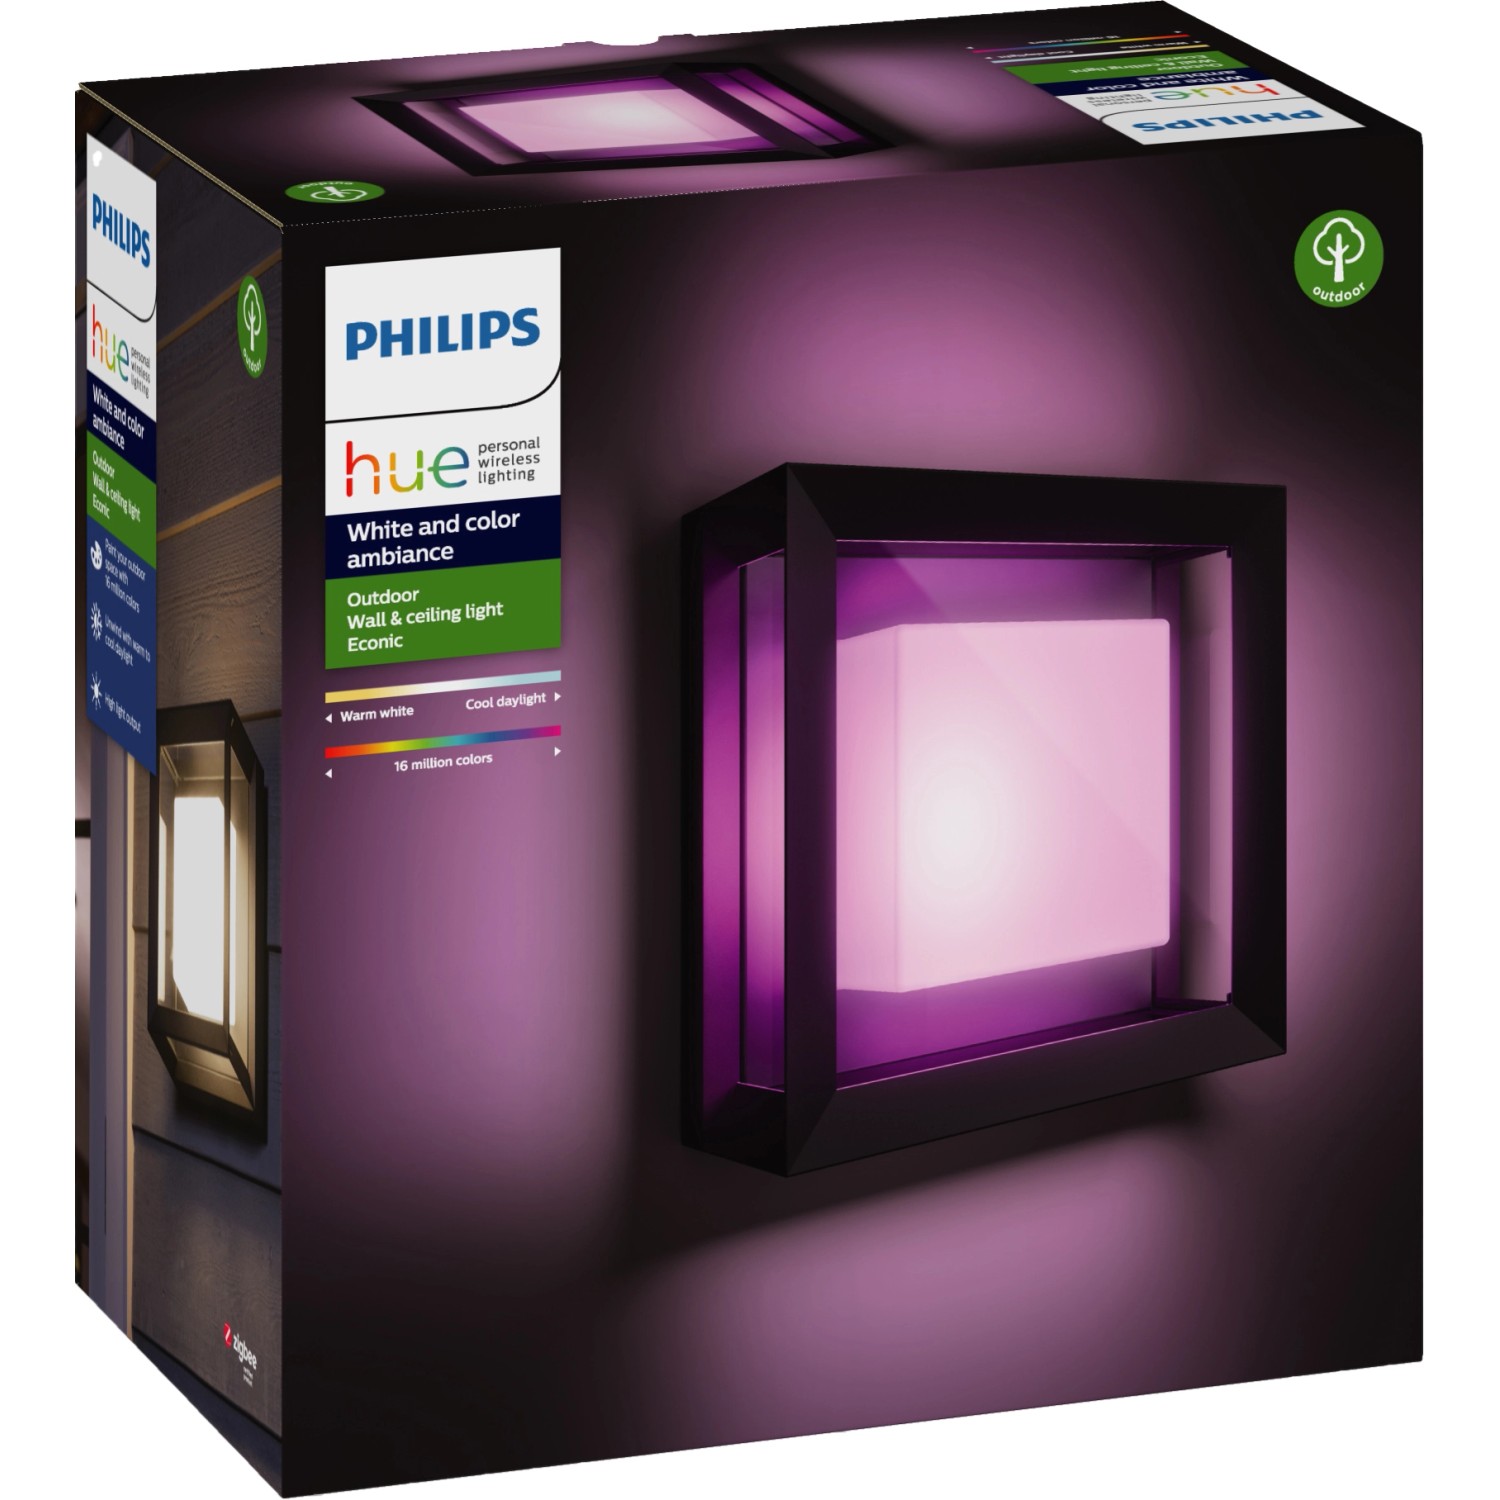 Philips Hue White & Color Ambiance Econic LED-Wandleuchte quadratisch